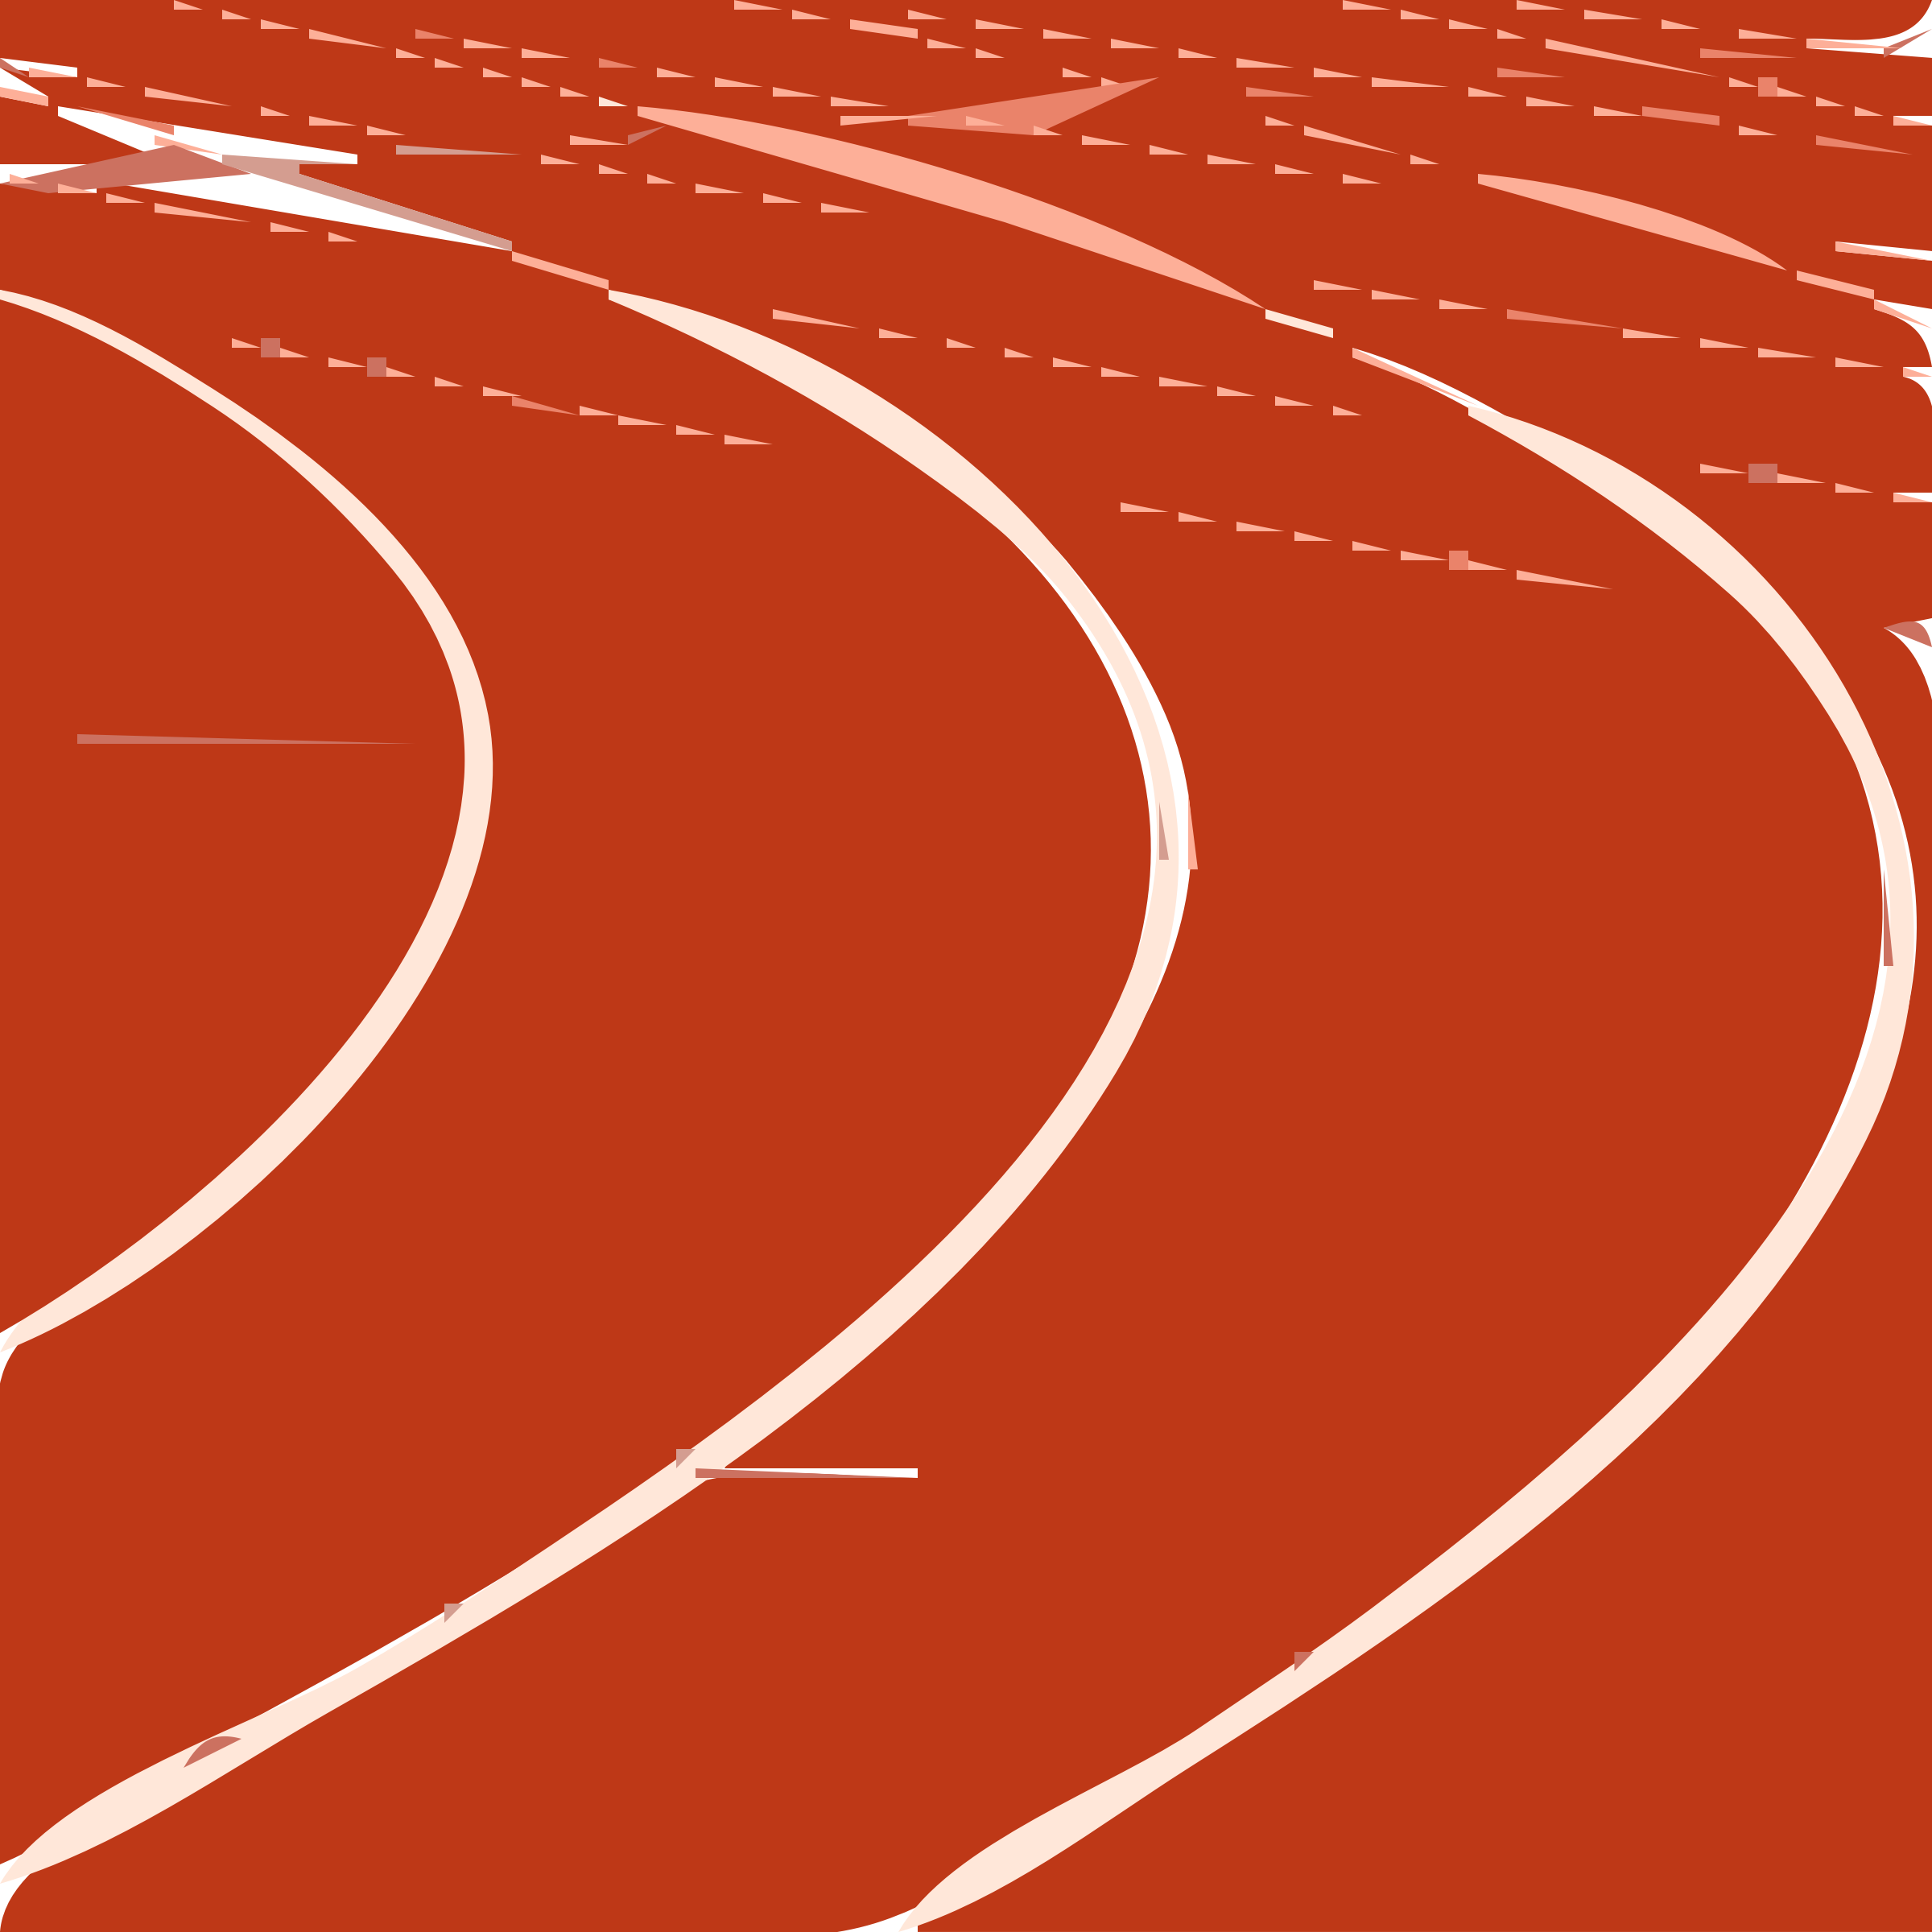 Big Image (Png) - Running Track, Transparent background PNG HD thumbnail